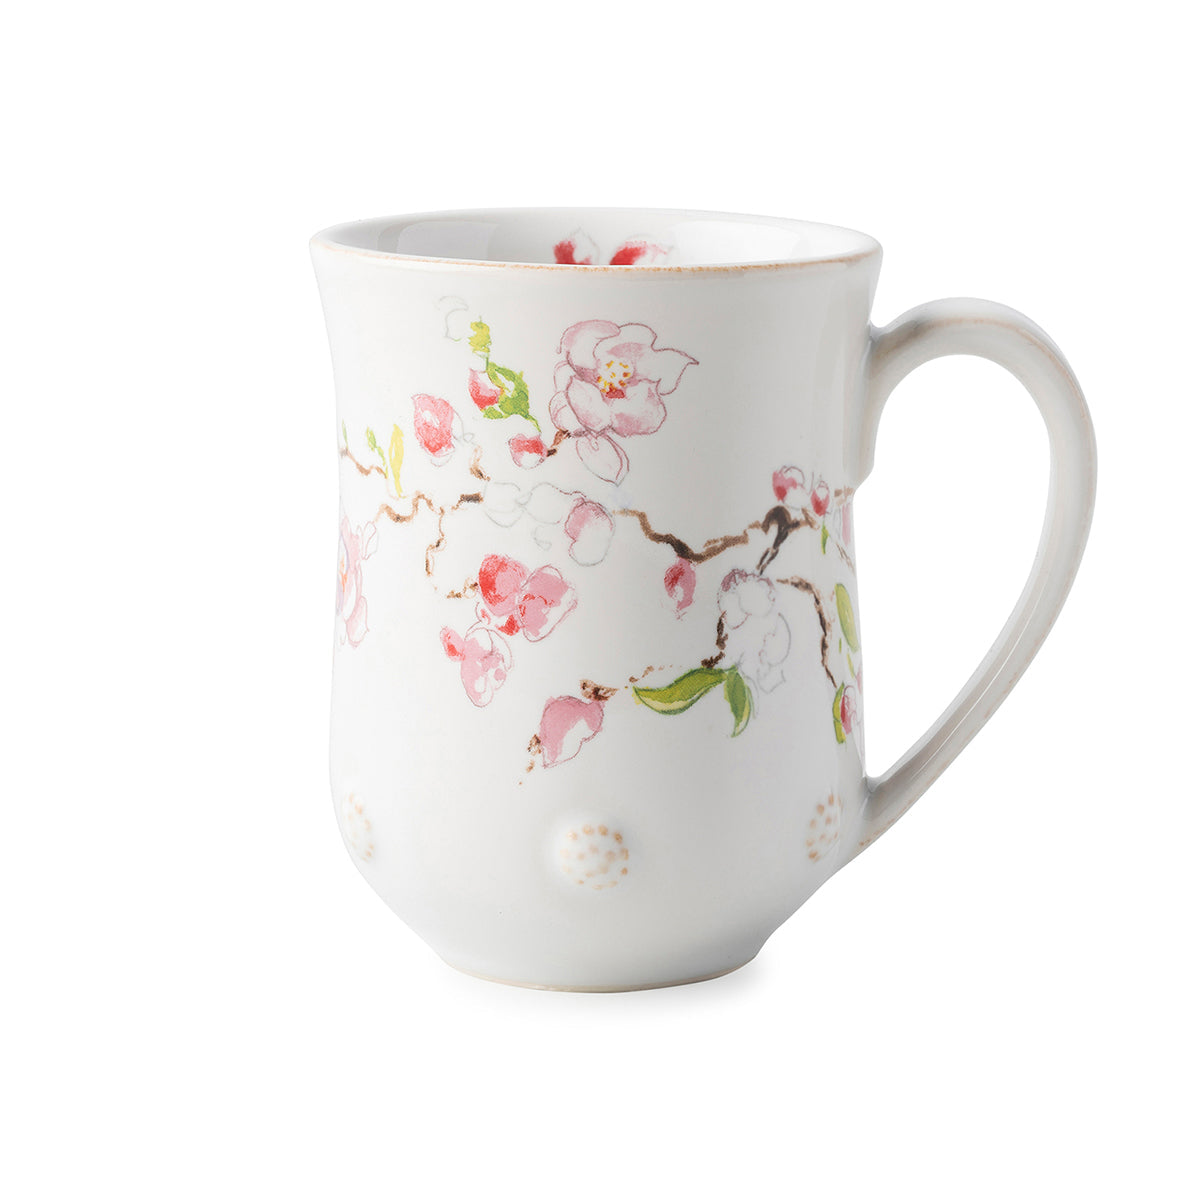 This Berry & Thread Whitewash Mug has the lovely addition of Cherry Blossom flowers, complete with ample depth for a substantial tea or coffee to go with your biscotti.